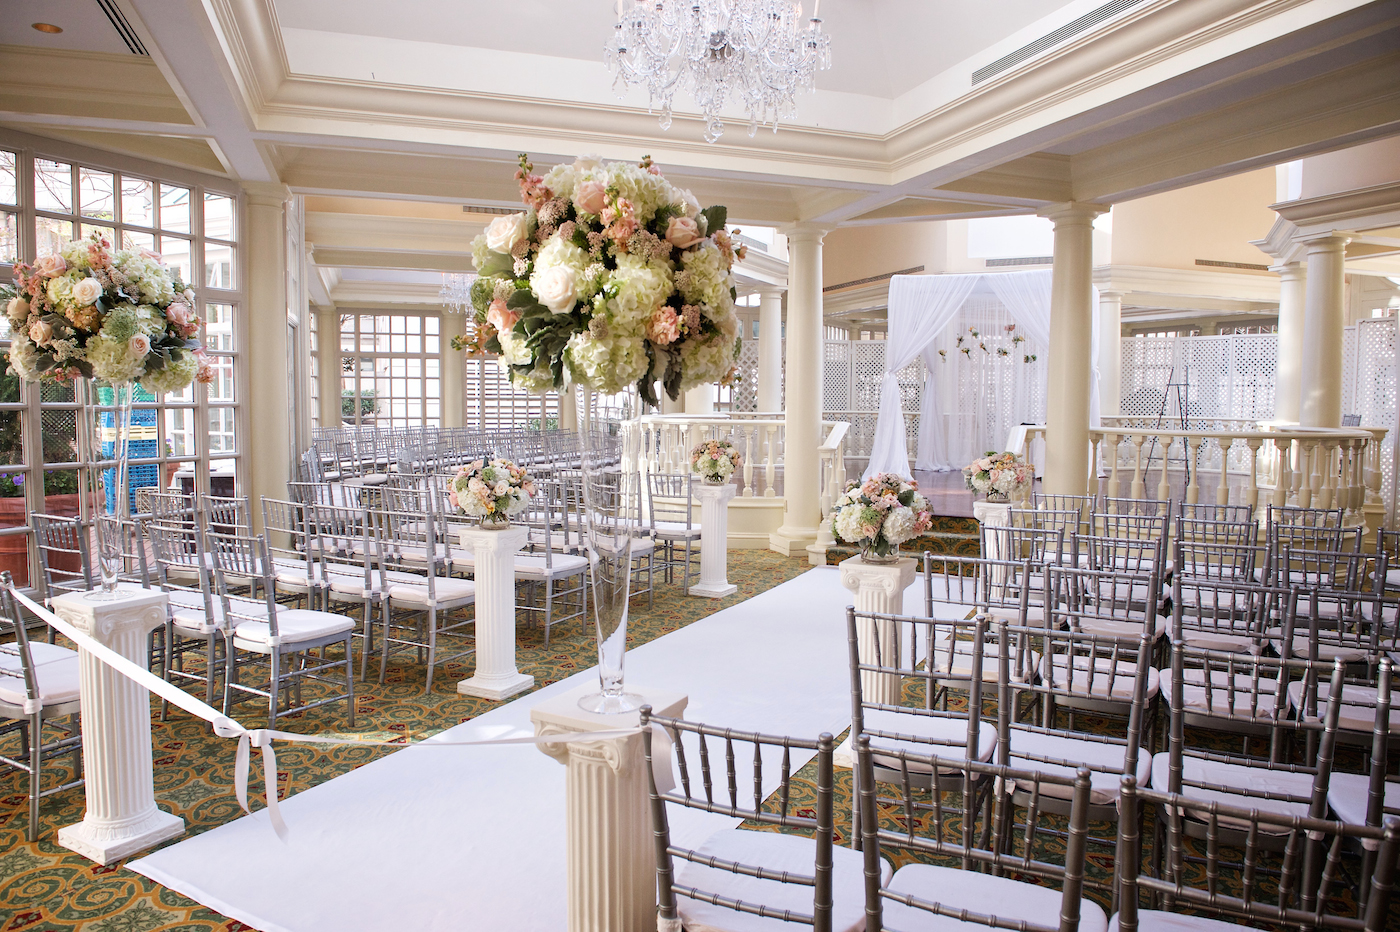 Stylish Spring DC Wedding at the Fairmont Hotel, DC Wedding Planner Bright Occasions, Photography by Deb Lindsey